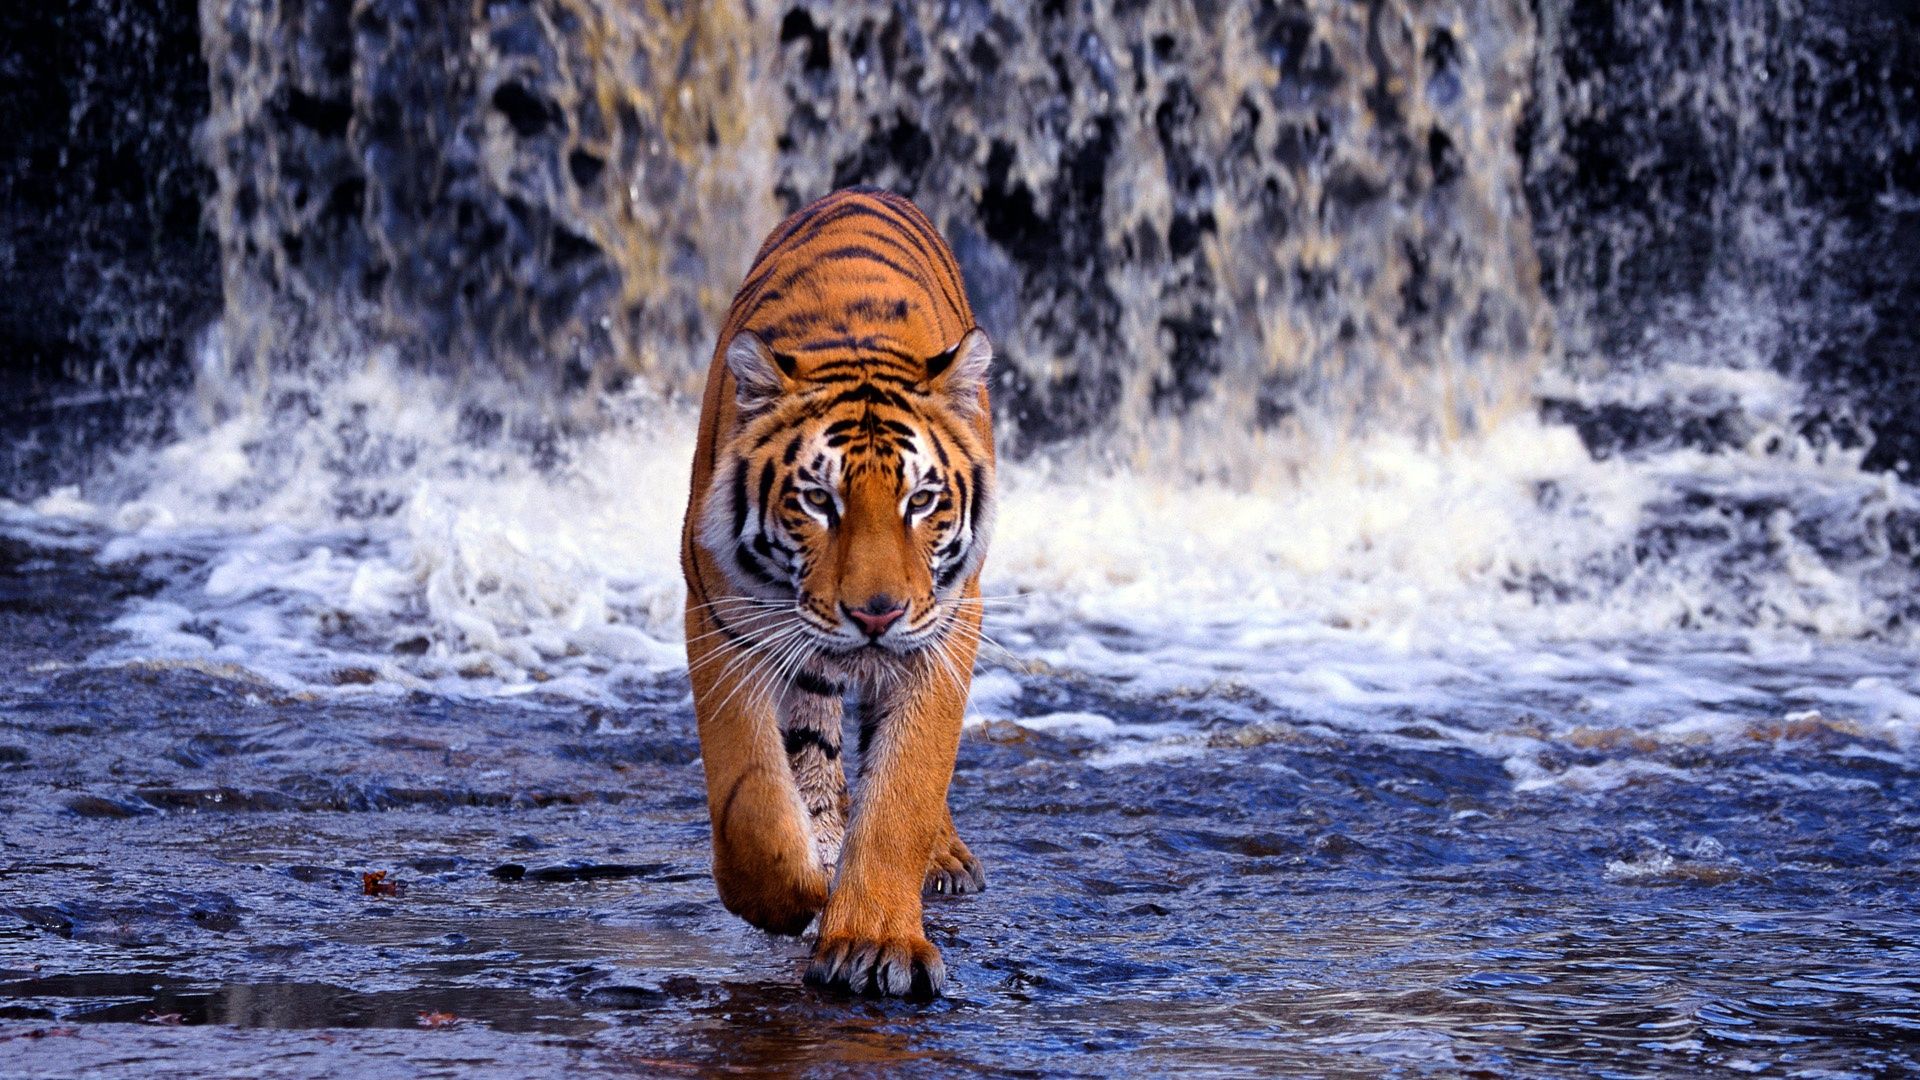 Tiger HD Wallpapers Free Download - Tremendous Backgrounds